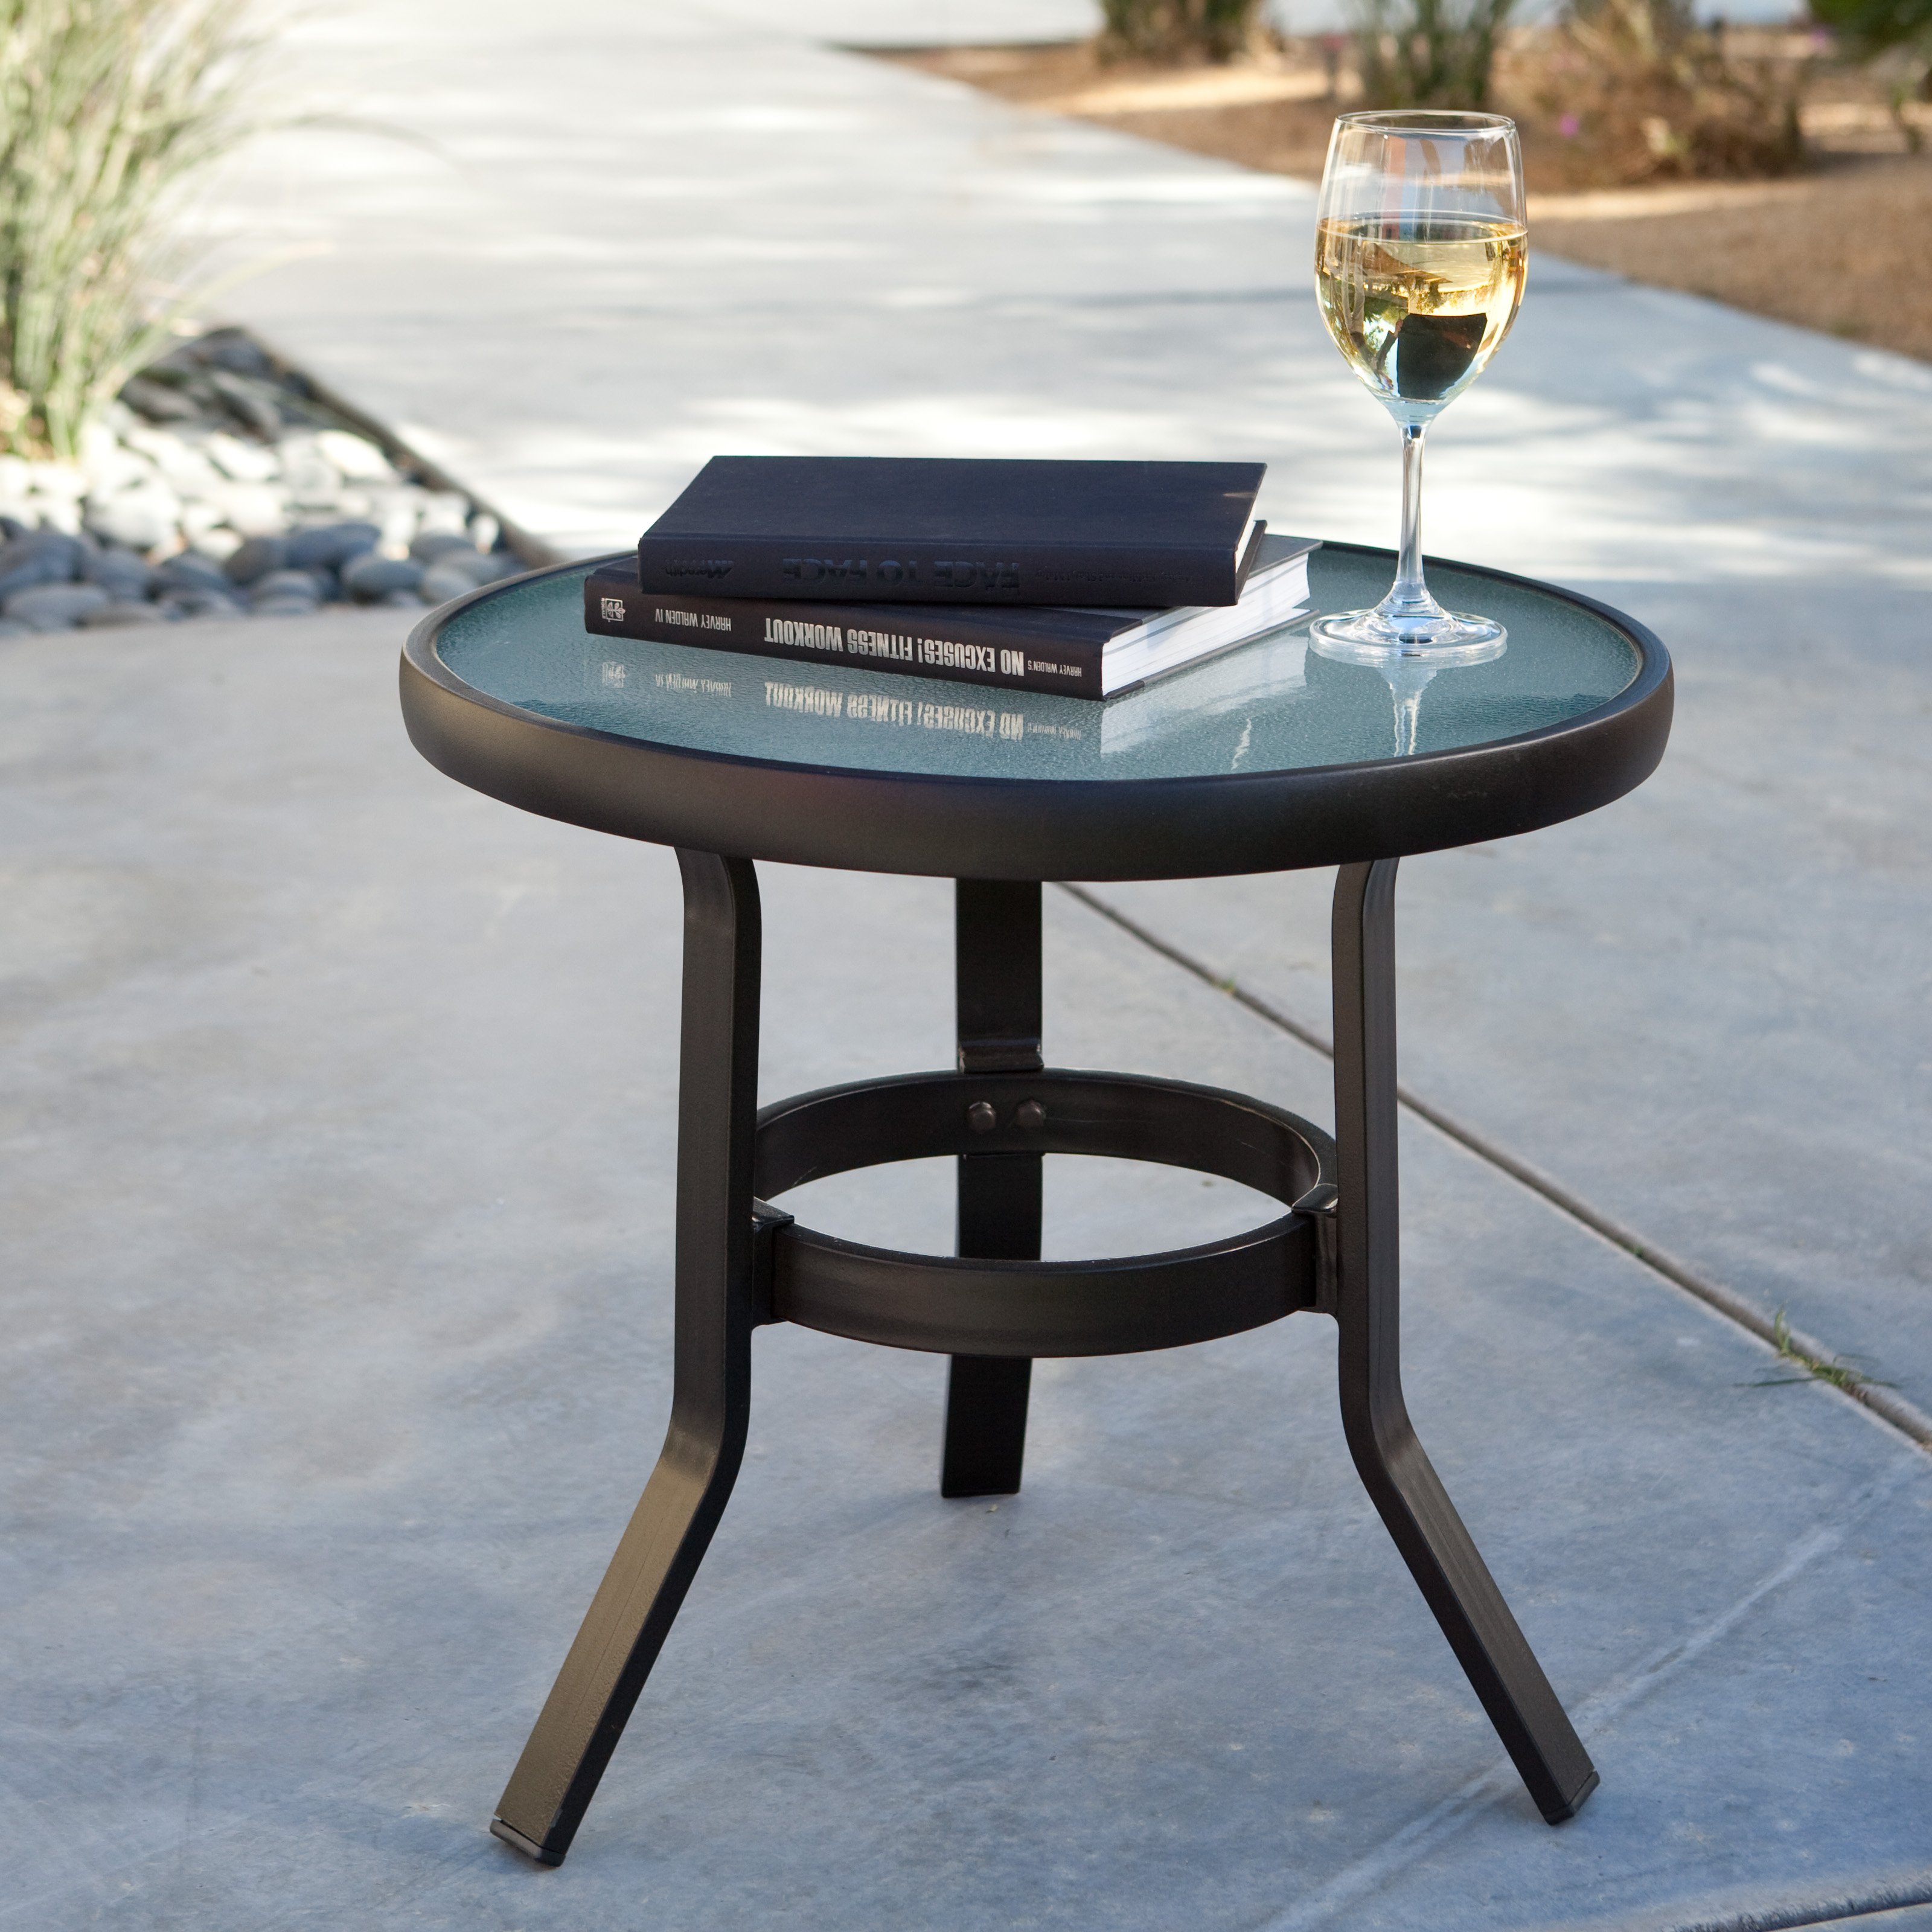 small outdoor table bookshelf trendy small outdoor patio table set of 18 round setting ...